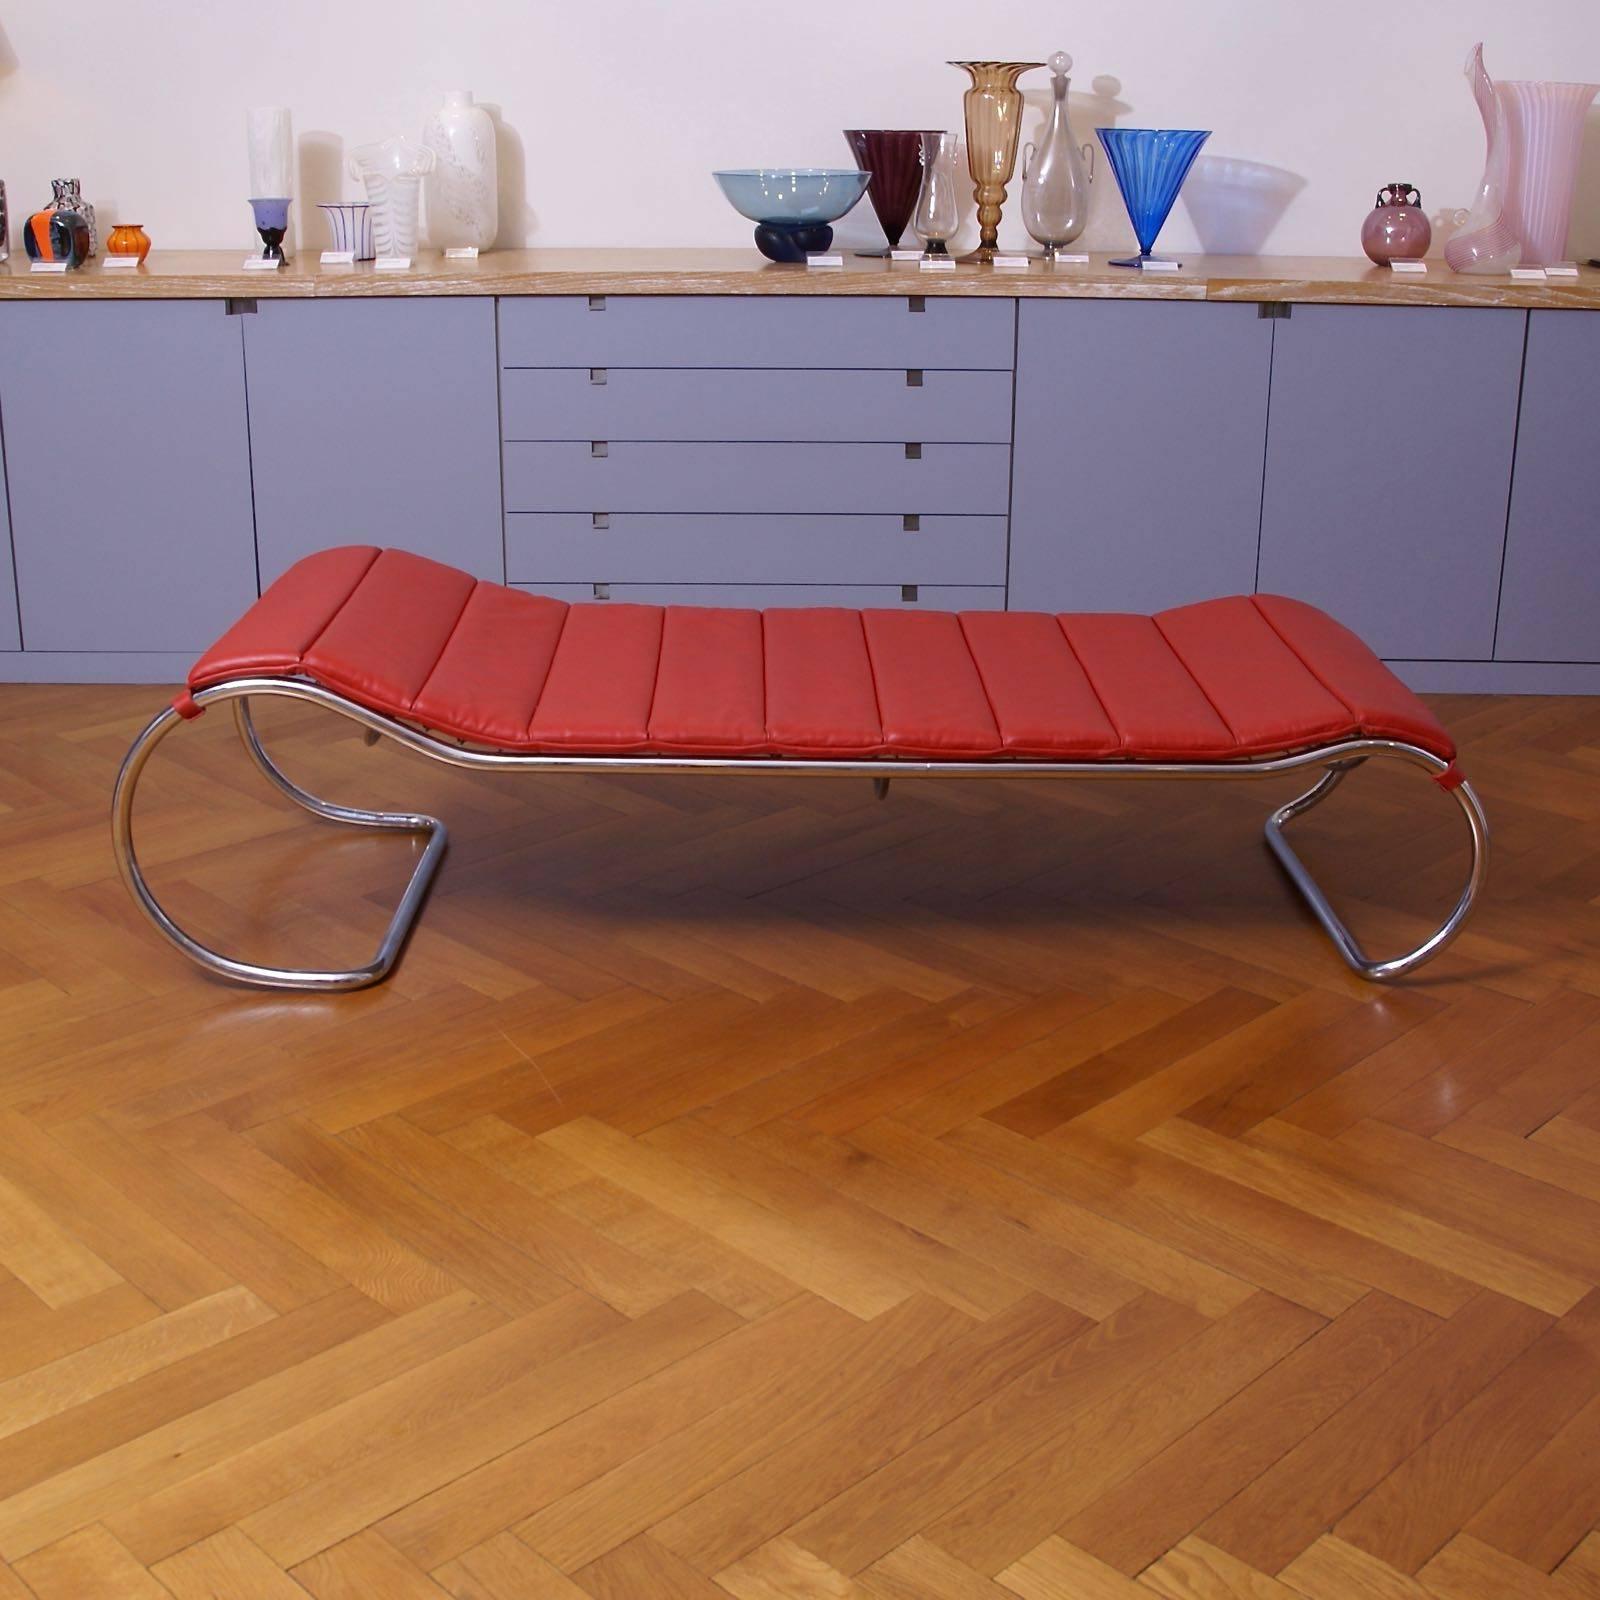 Spectacular chrome and leather LS 23 daybed made by Thonet, design Anton Lorenz 1931. Chrome in perfect condition, removable leather mattress renewed ten years ago.
Lit: 